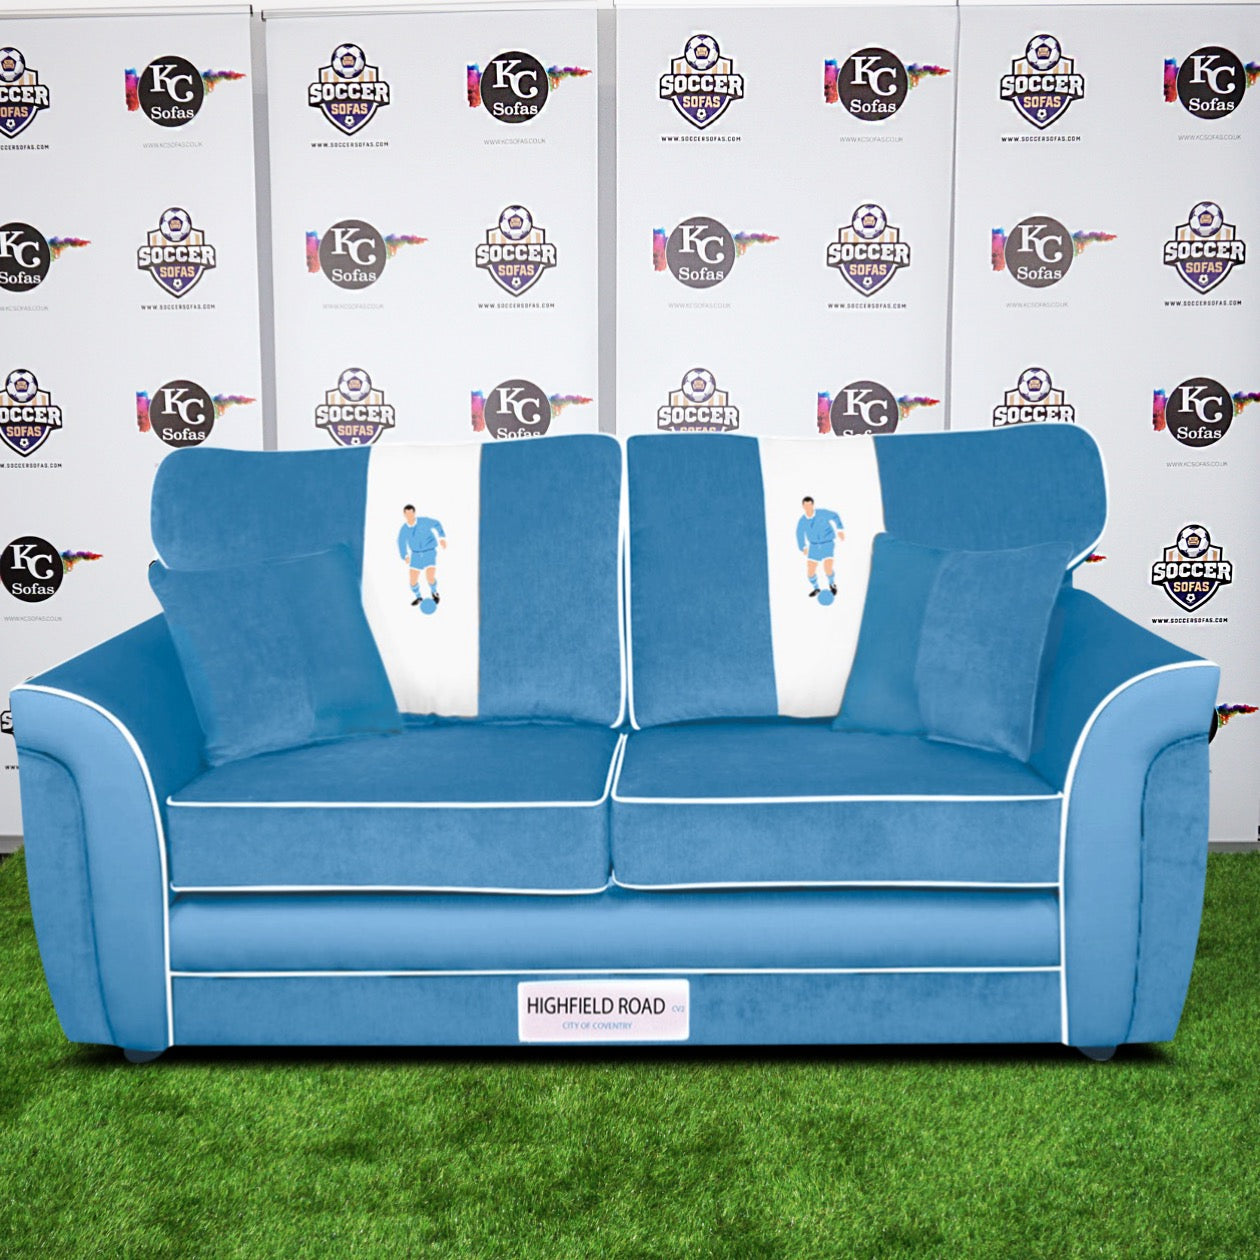 Highfield Road 3 Seater Sofa (Coventry City FC)